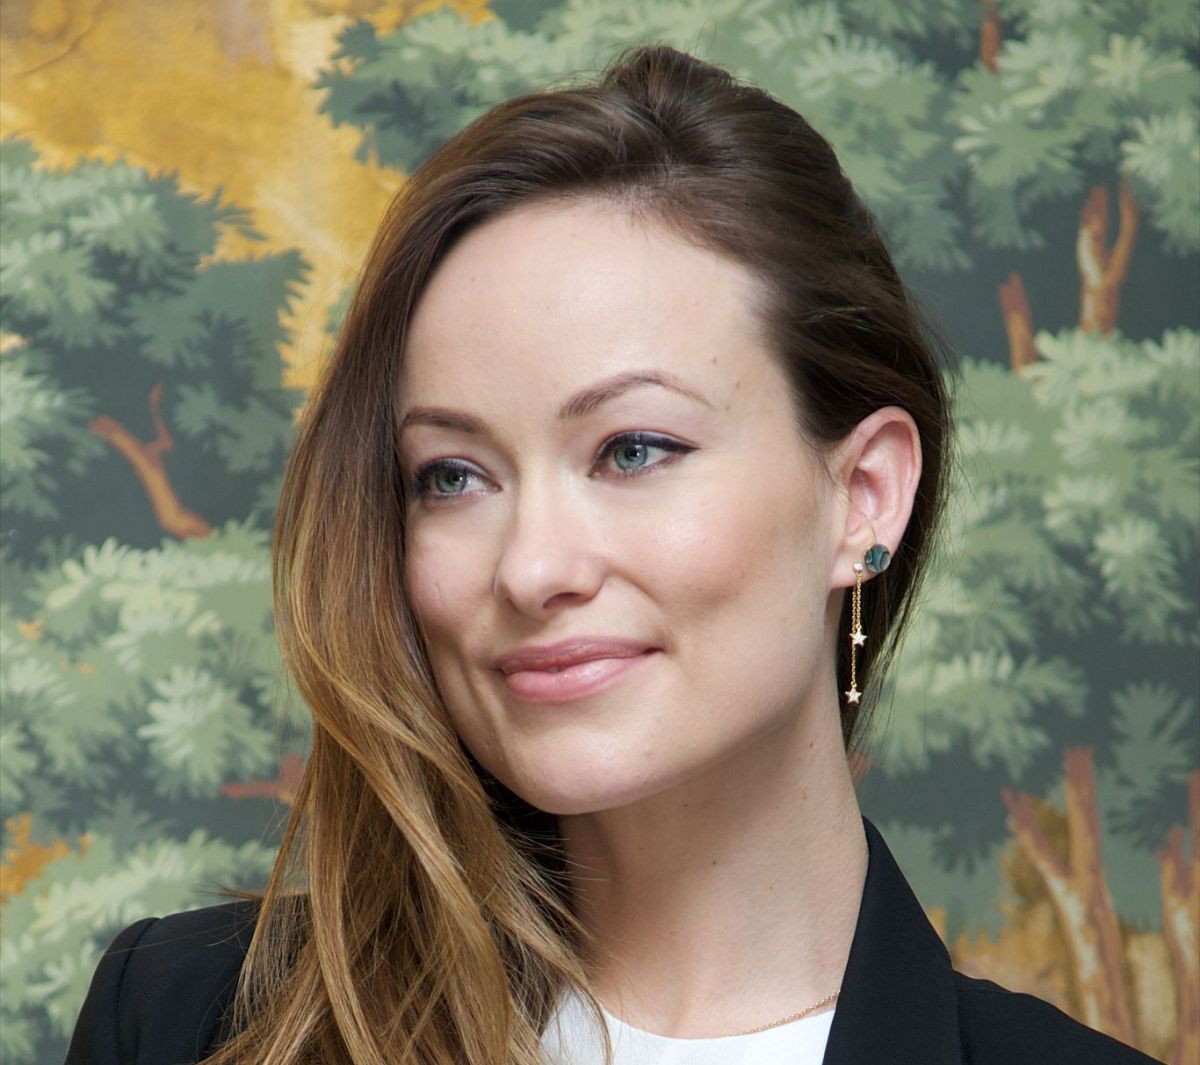 OLIVIA WILDE at Vinyl Press Conference Portraits in New York 11/21/2015 - HawtCelebs